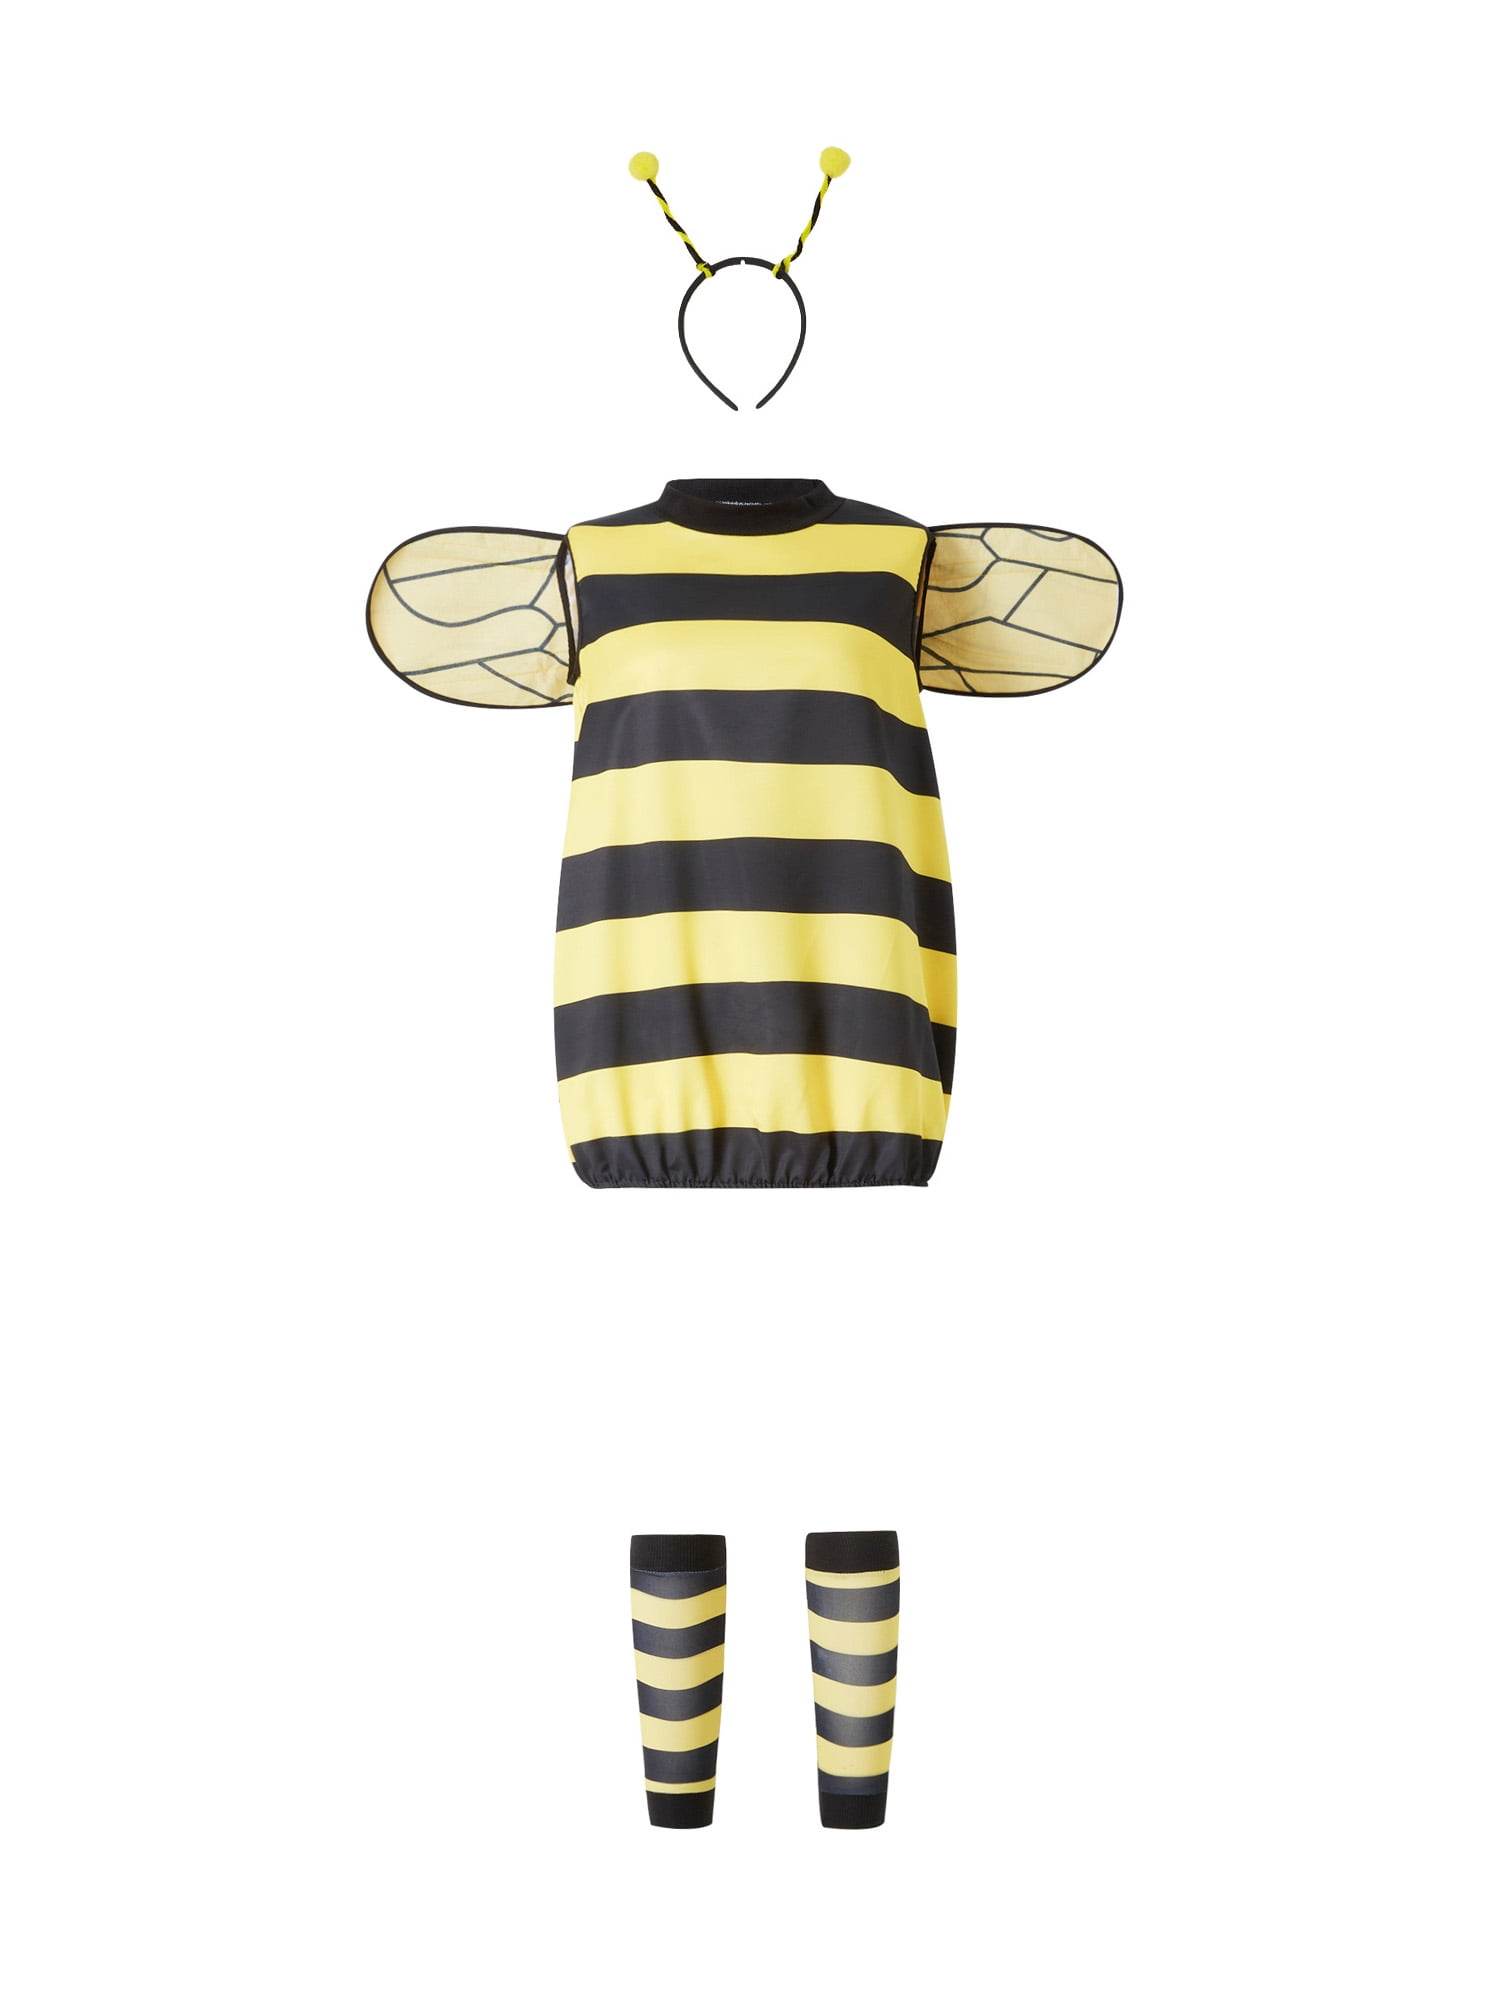 Bee Costume Accessories Set for Kids